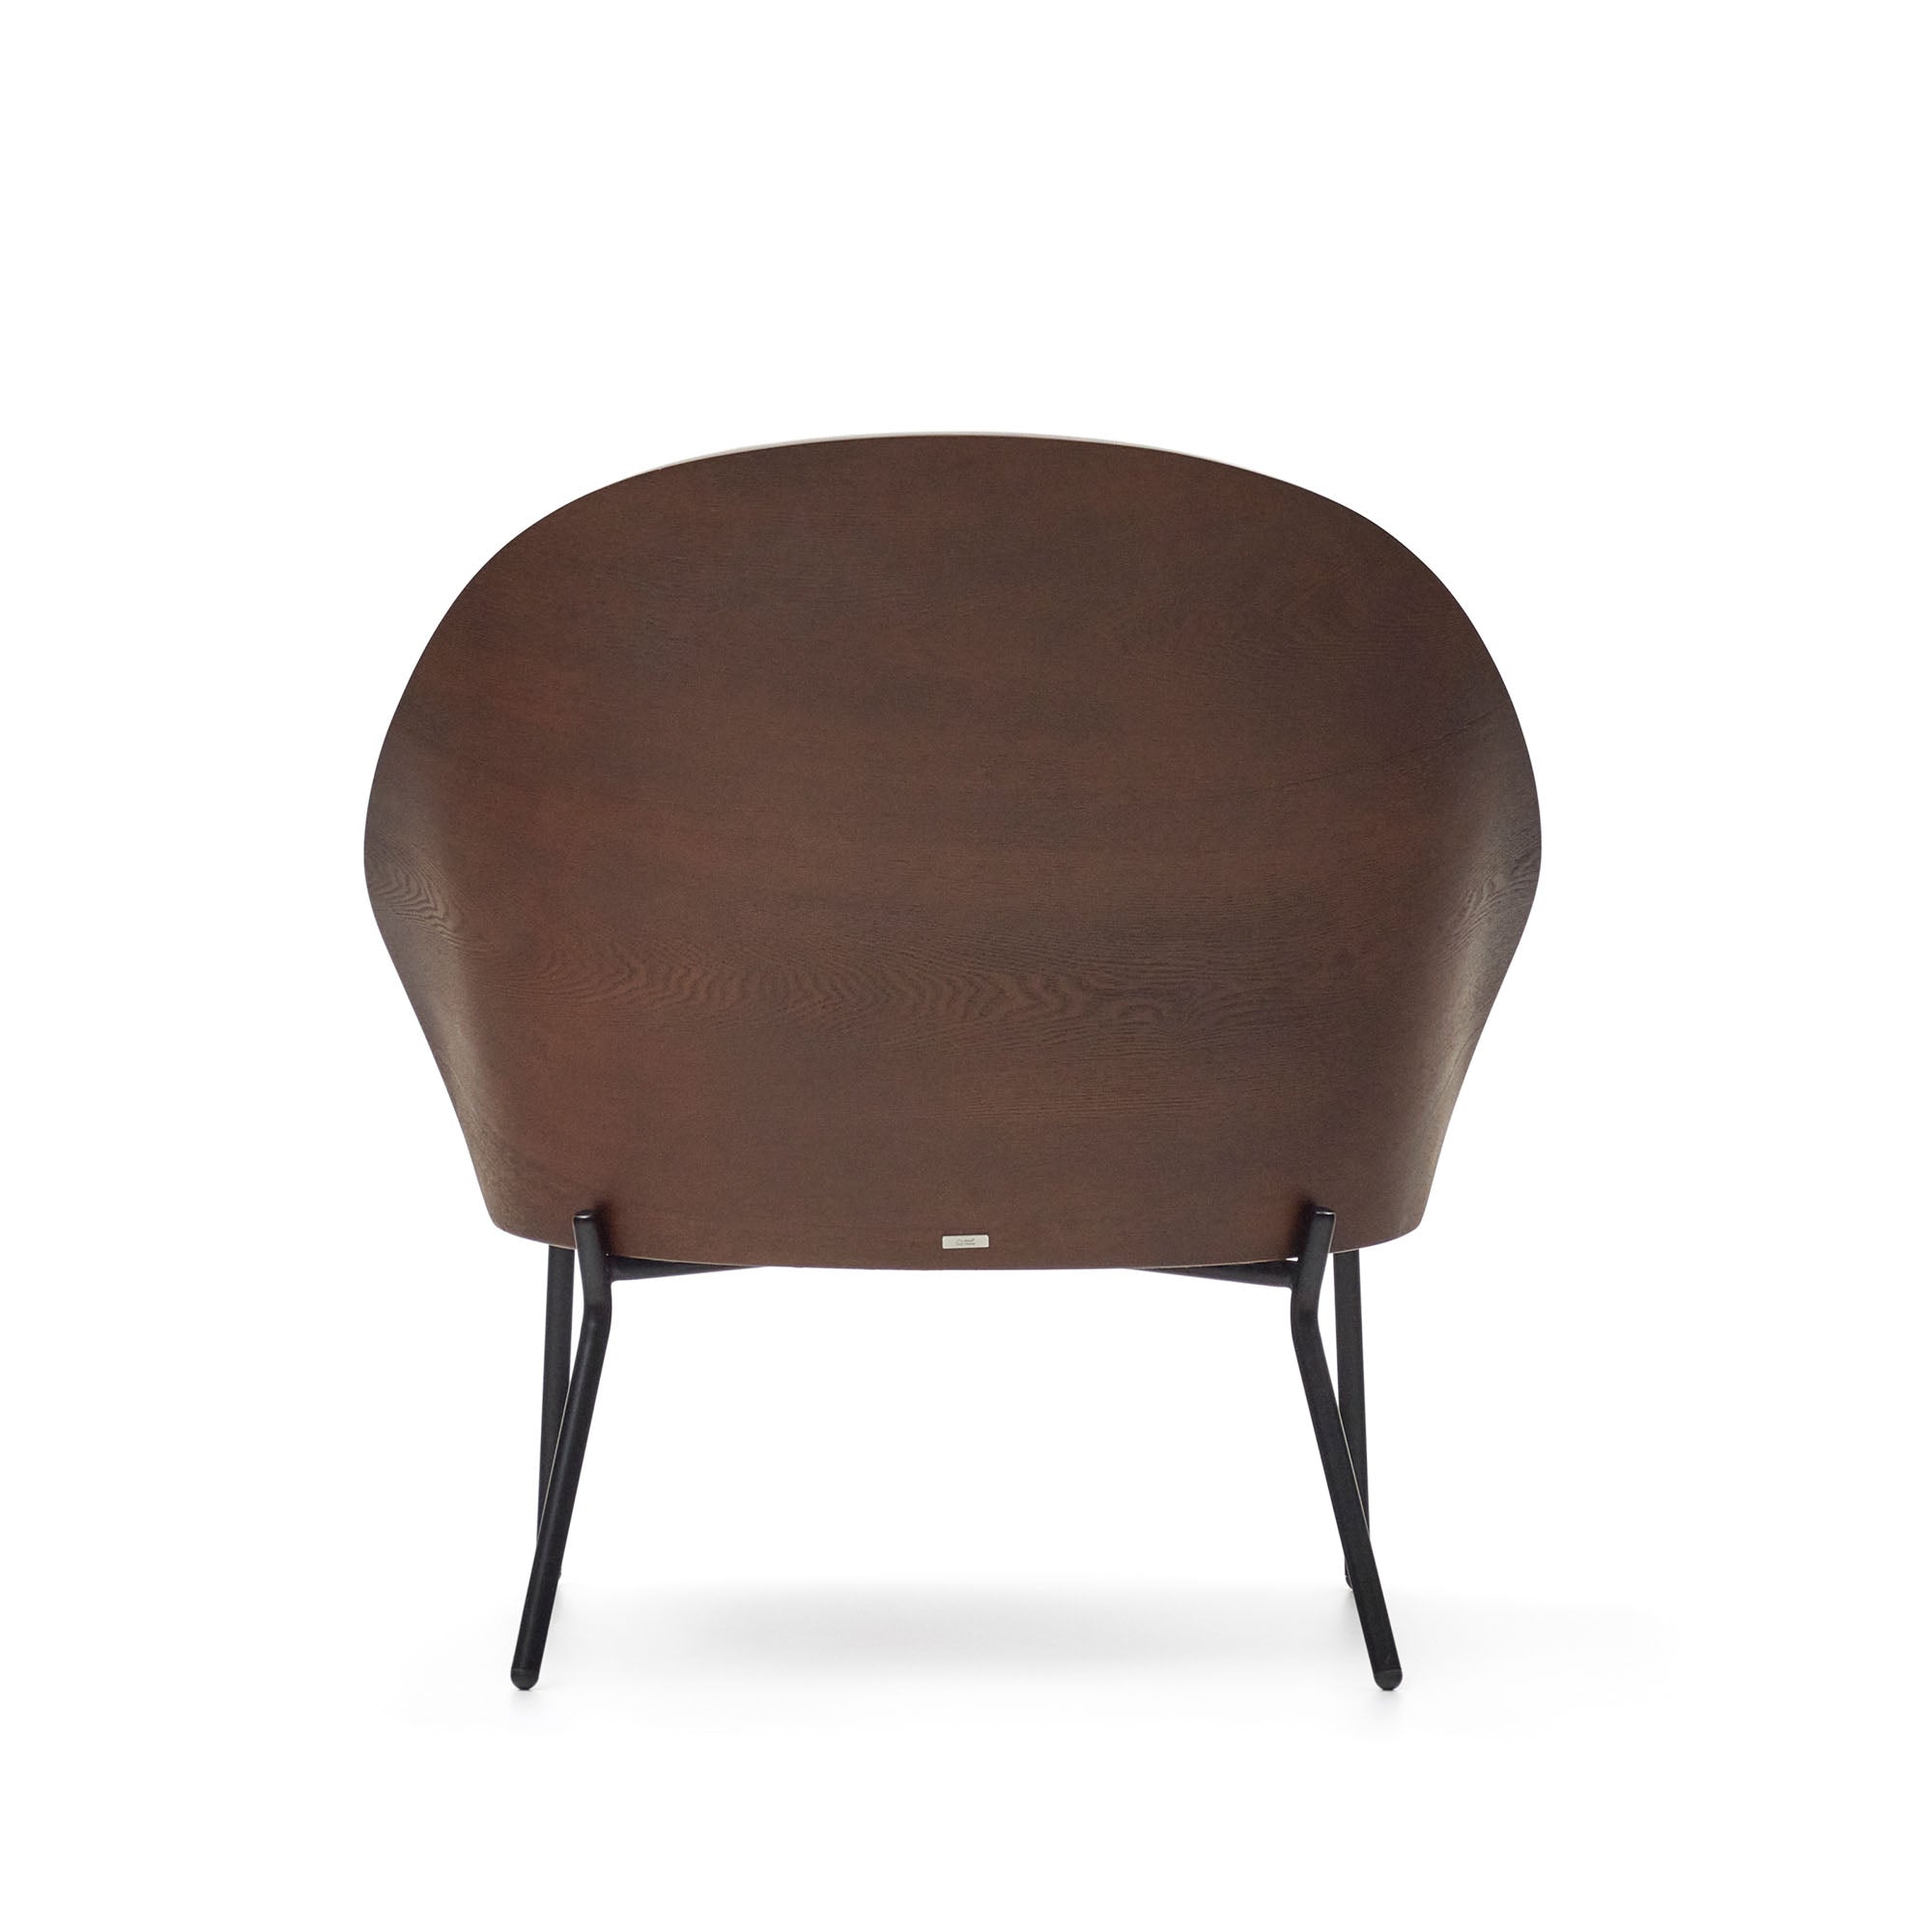 Eamy light brown armchair in an ash wood veneer with a wenge finish and black metal